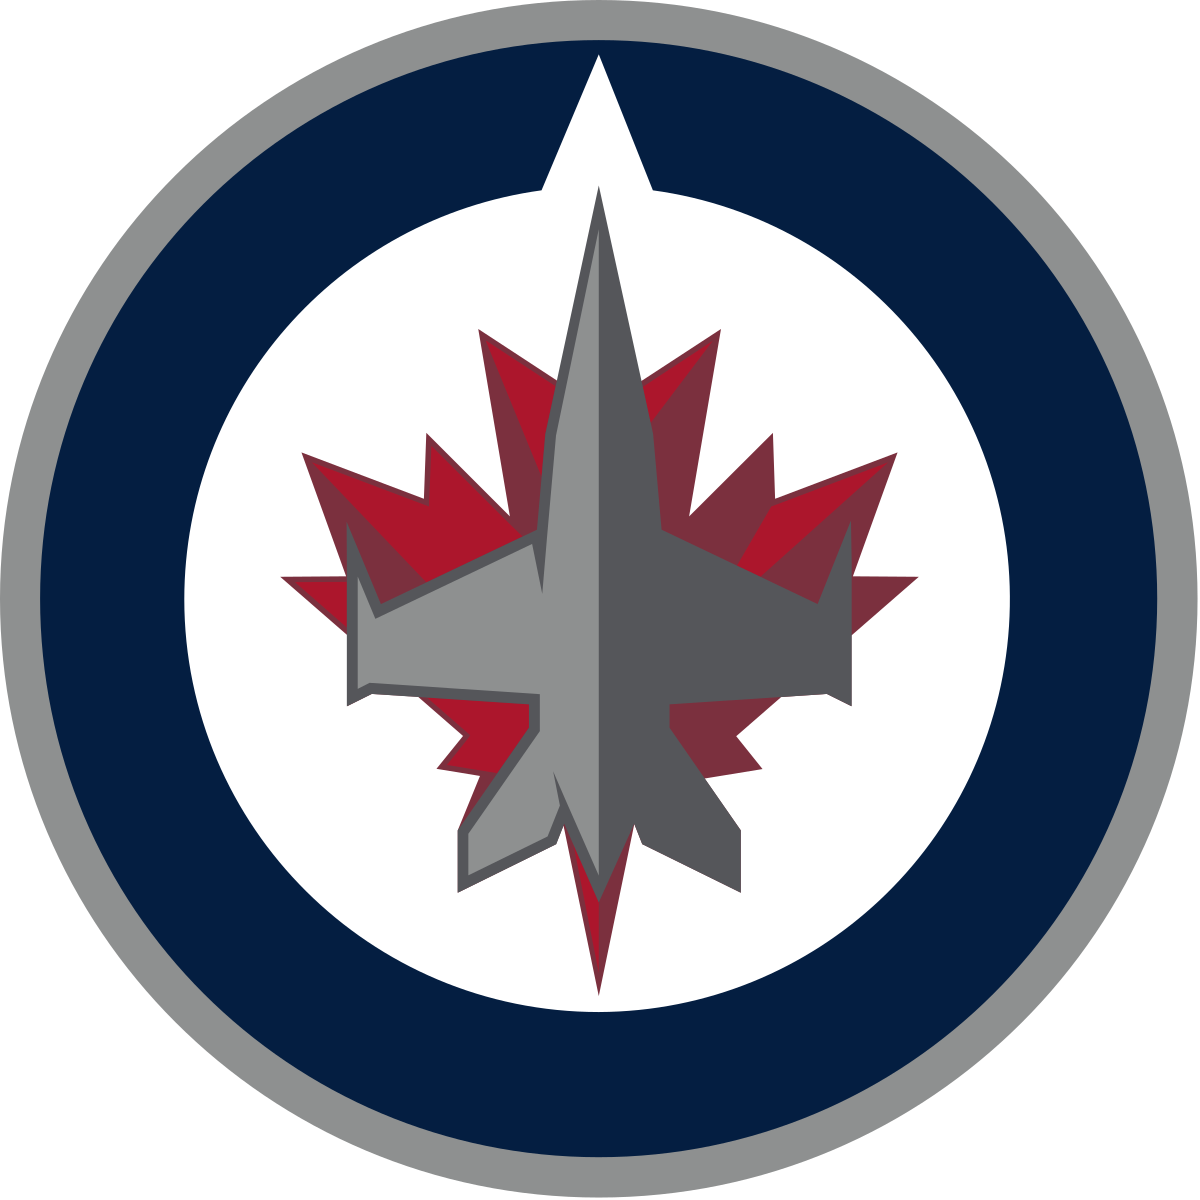 Go Jets Go